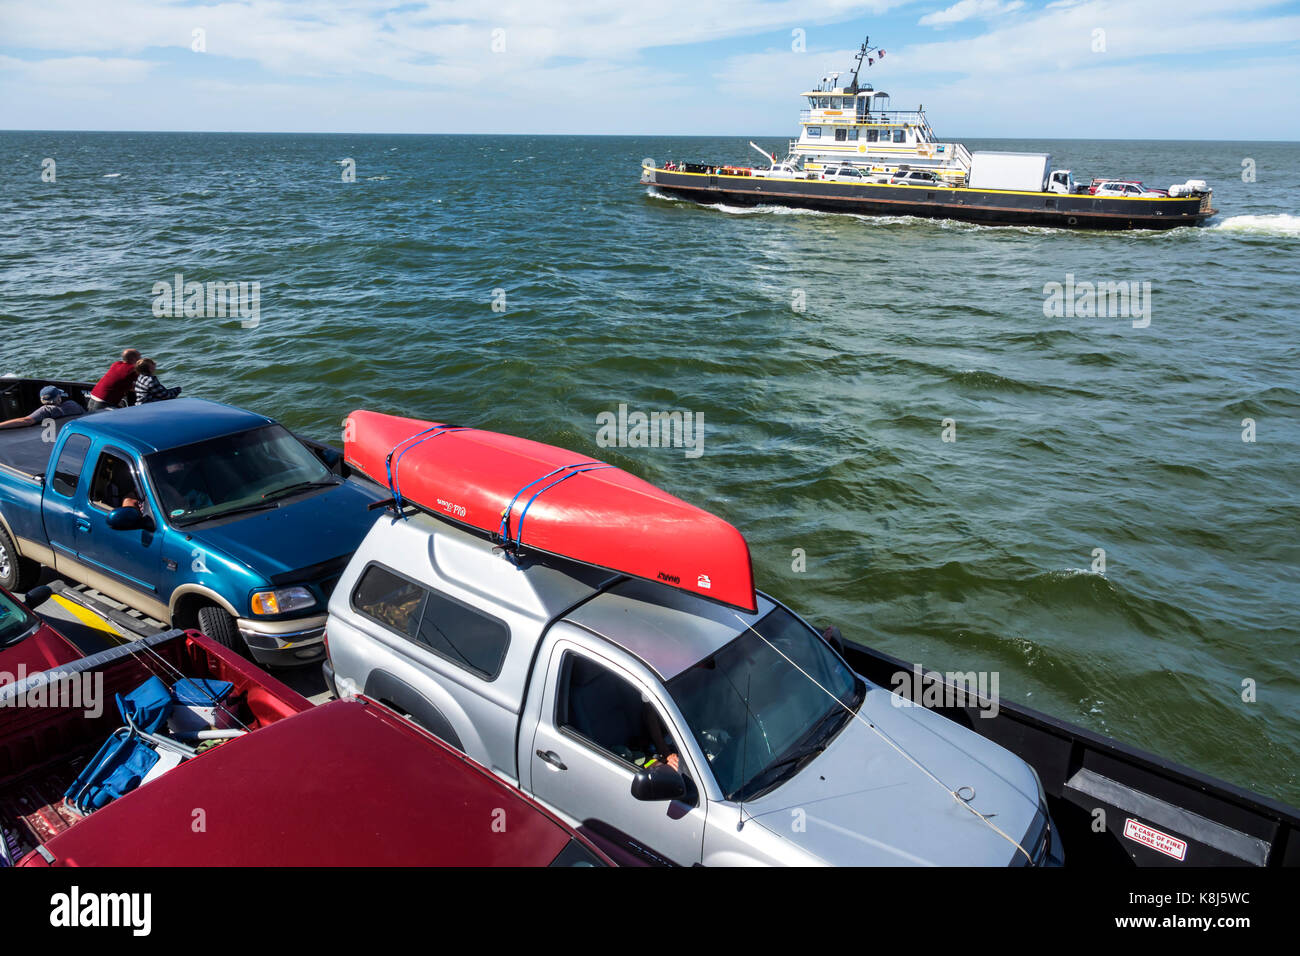 North Carolina,NC,Outer Banks,Pamlico Sound,Ocracoke Island,Hatteras,ferry,water,navigating,vehicles,waves,passing boat,carrying canoe,NC170518137 Stock Photo